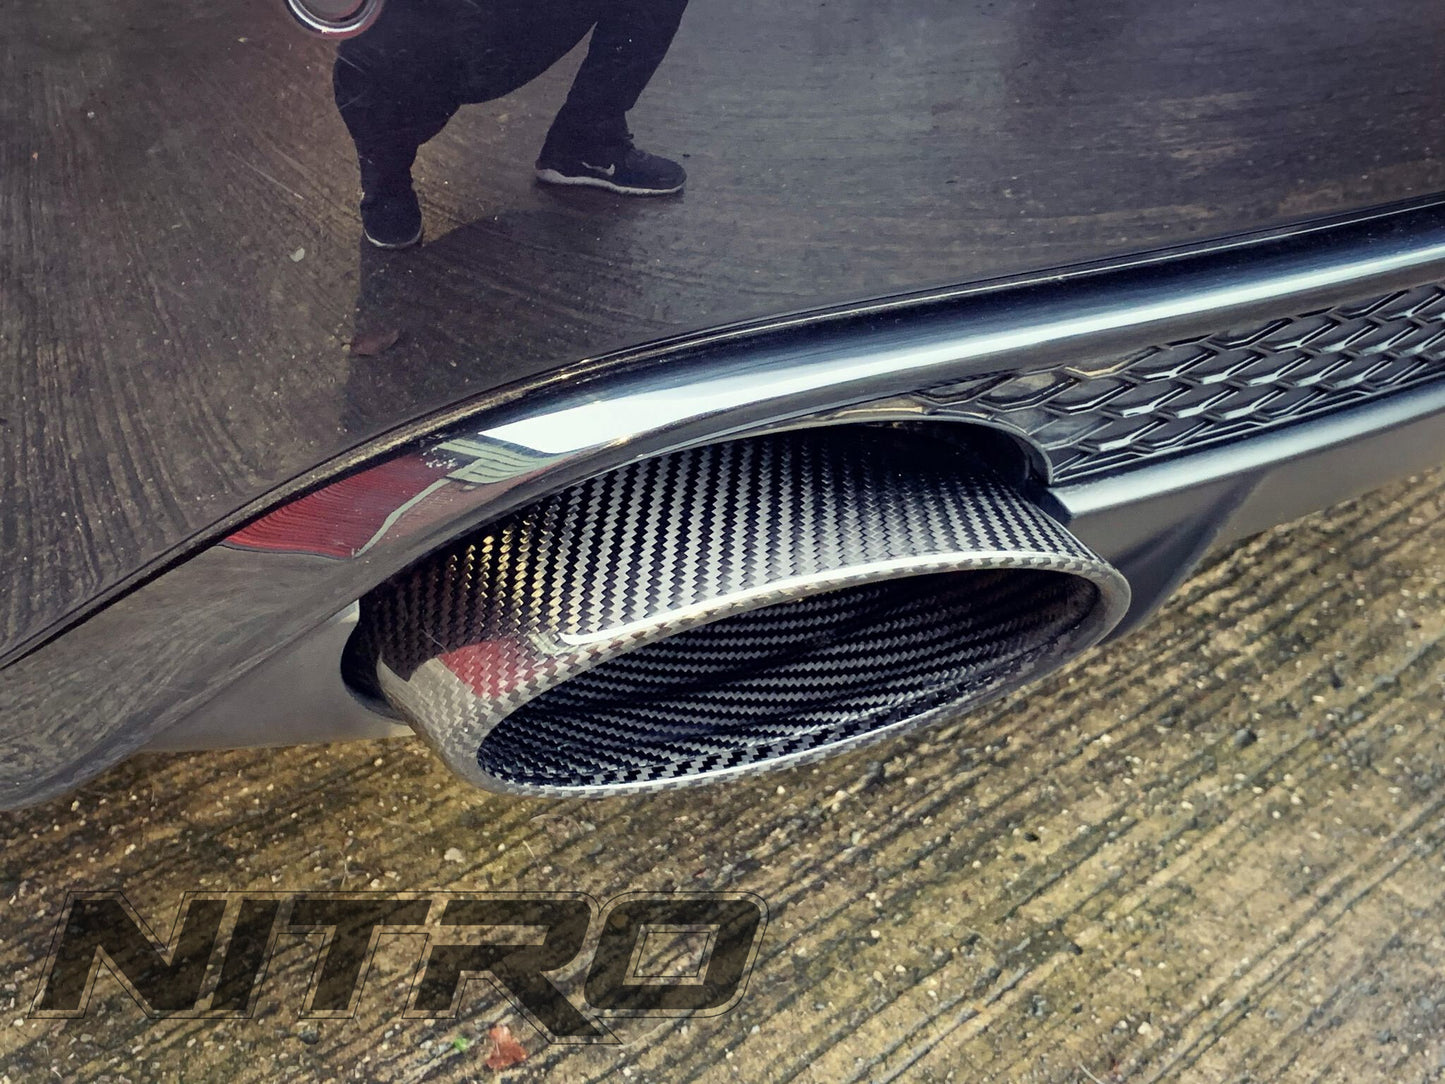 AUDI RS4 (2012-2015) B8 B8.5 Adjustable Fit Carbon Fibre Exhaust Tip Tail Pipe for 4.2L V8 FSI